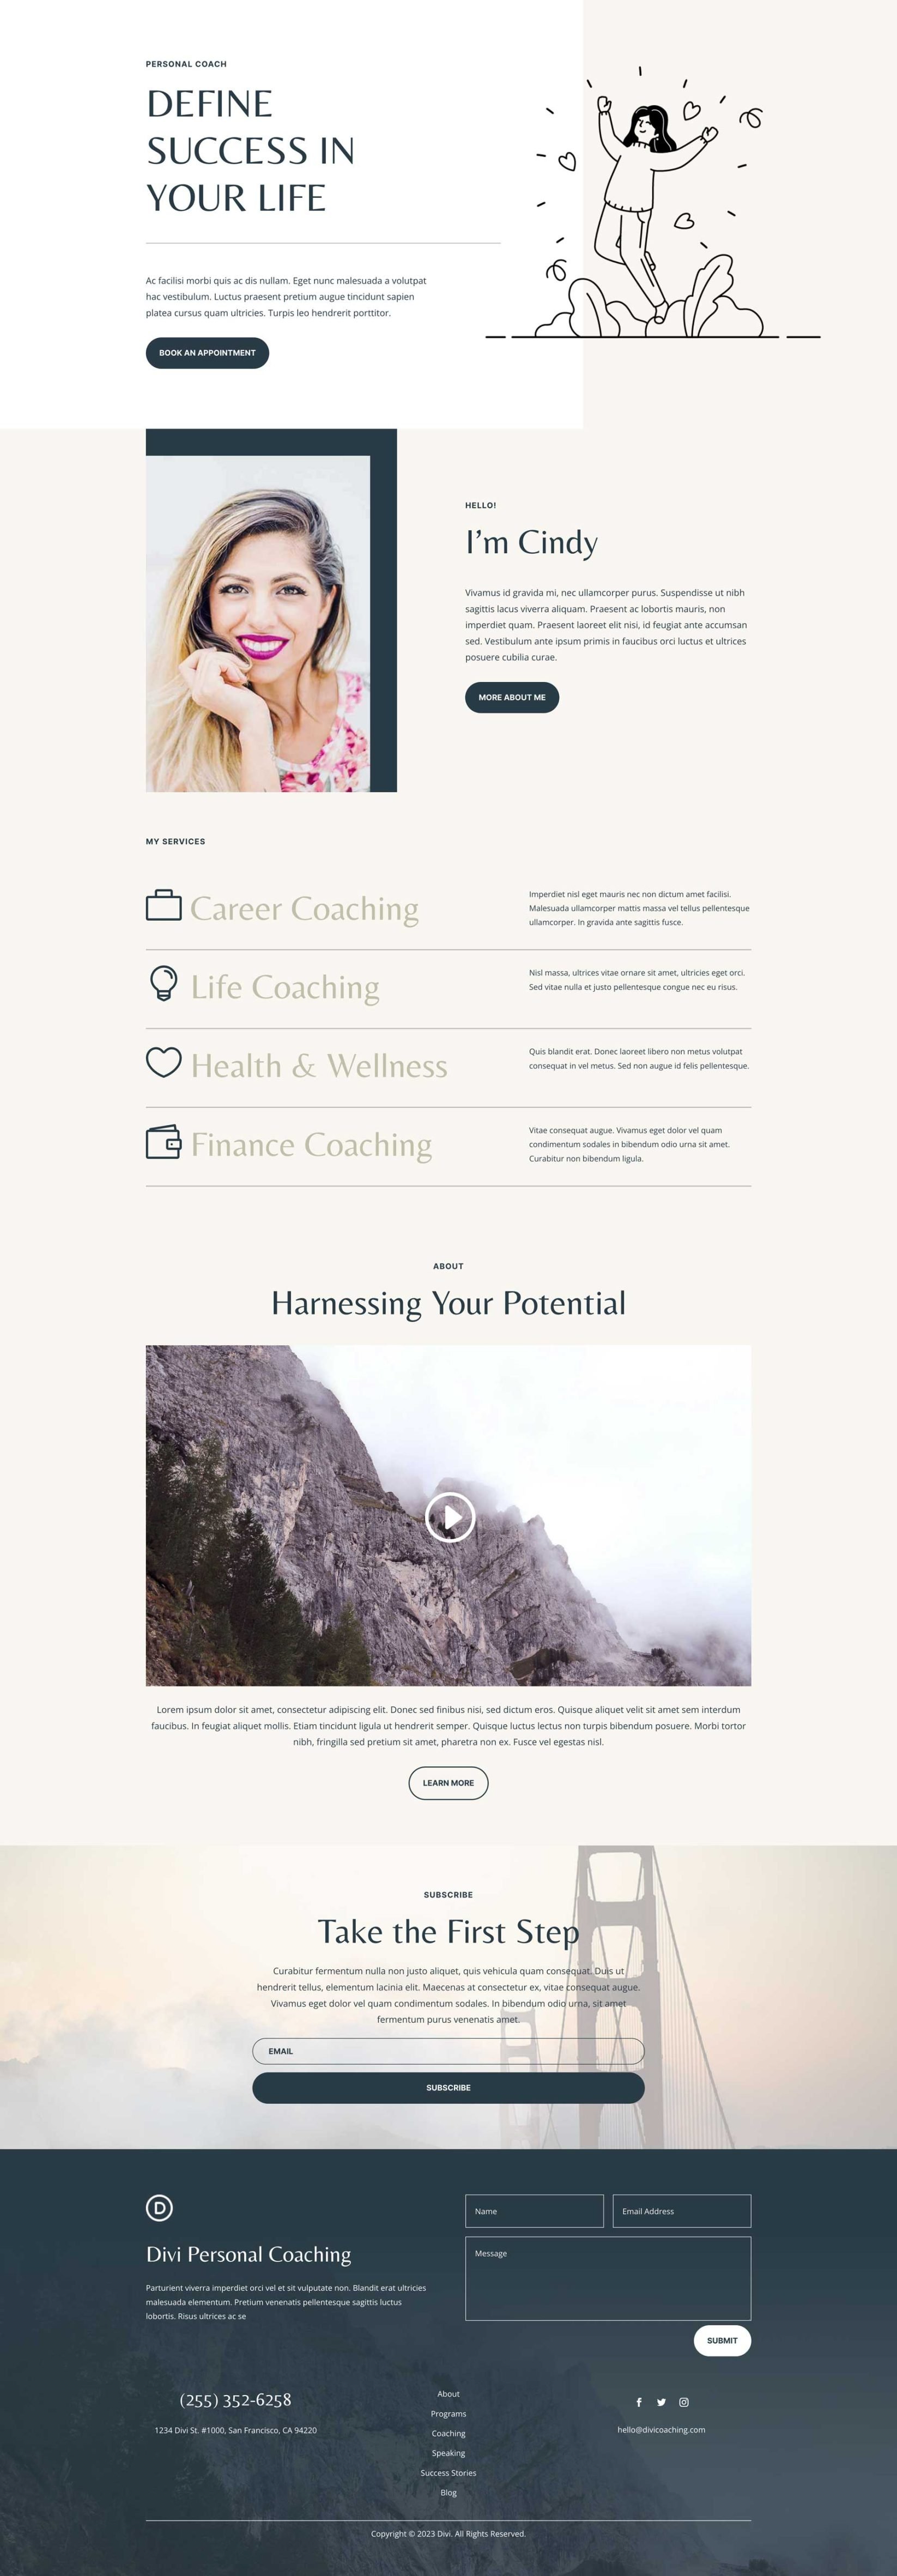 Coach - Home Page